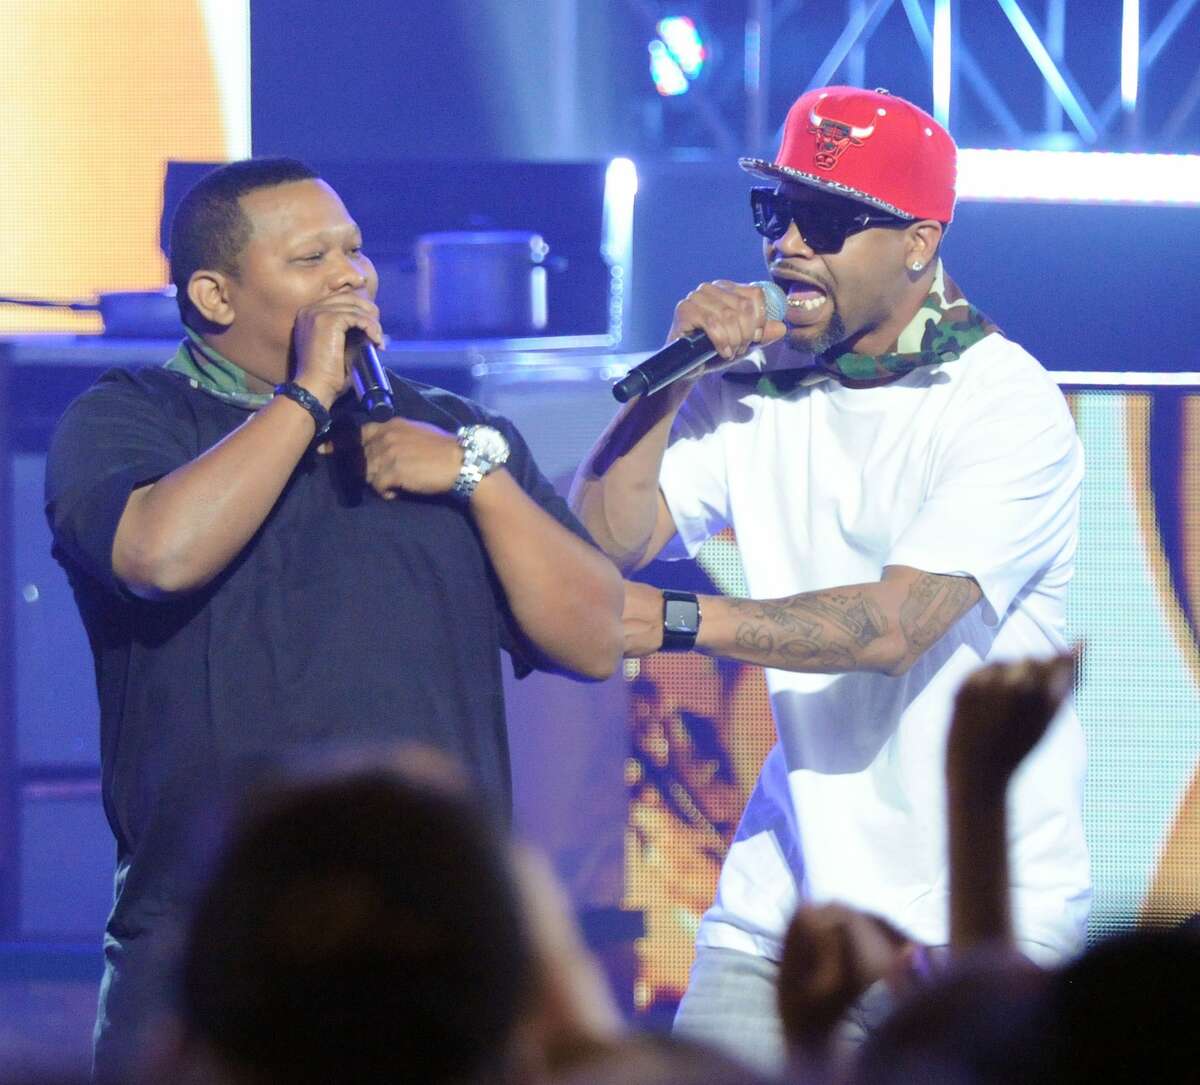 Mannie Fresh and Juvenile join forces for "Vax That Thang Up." (Photo by Chris McKay/WireImage)